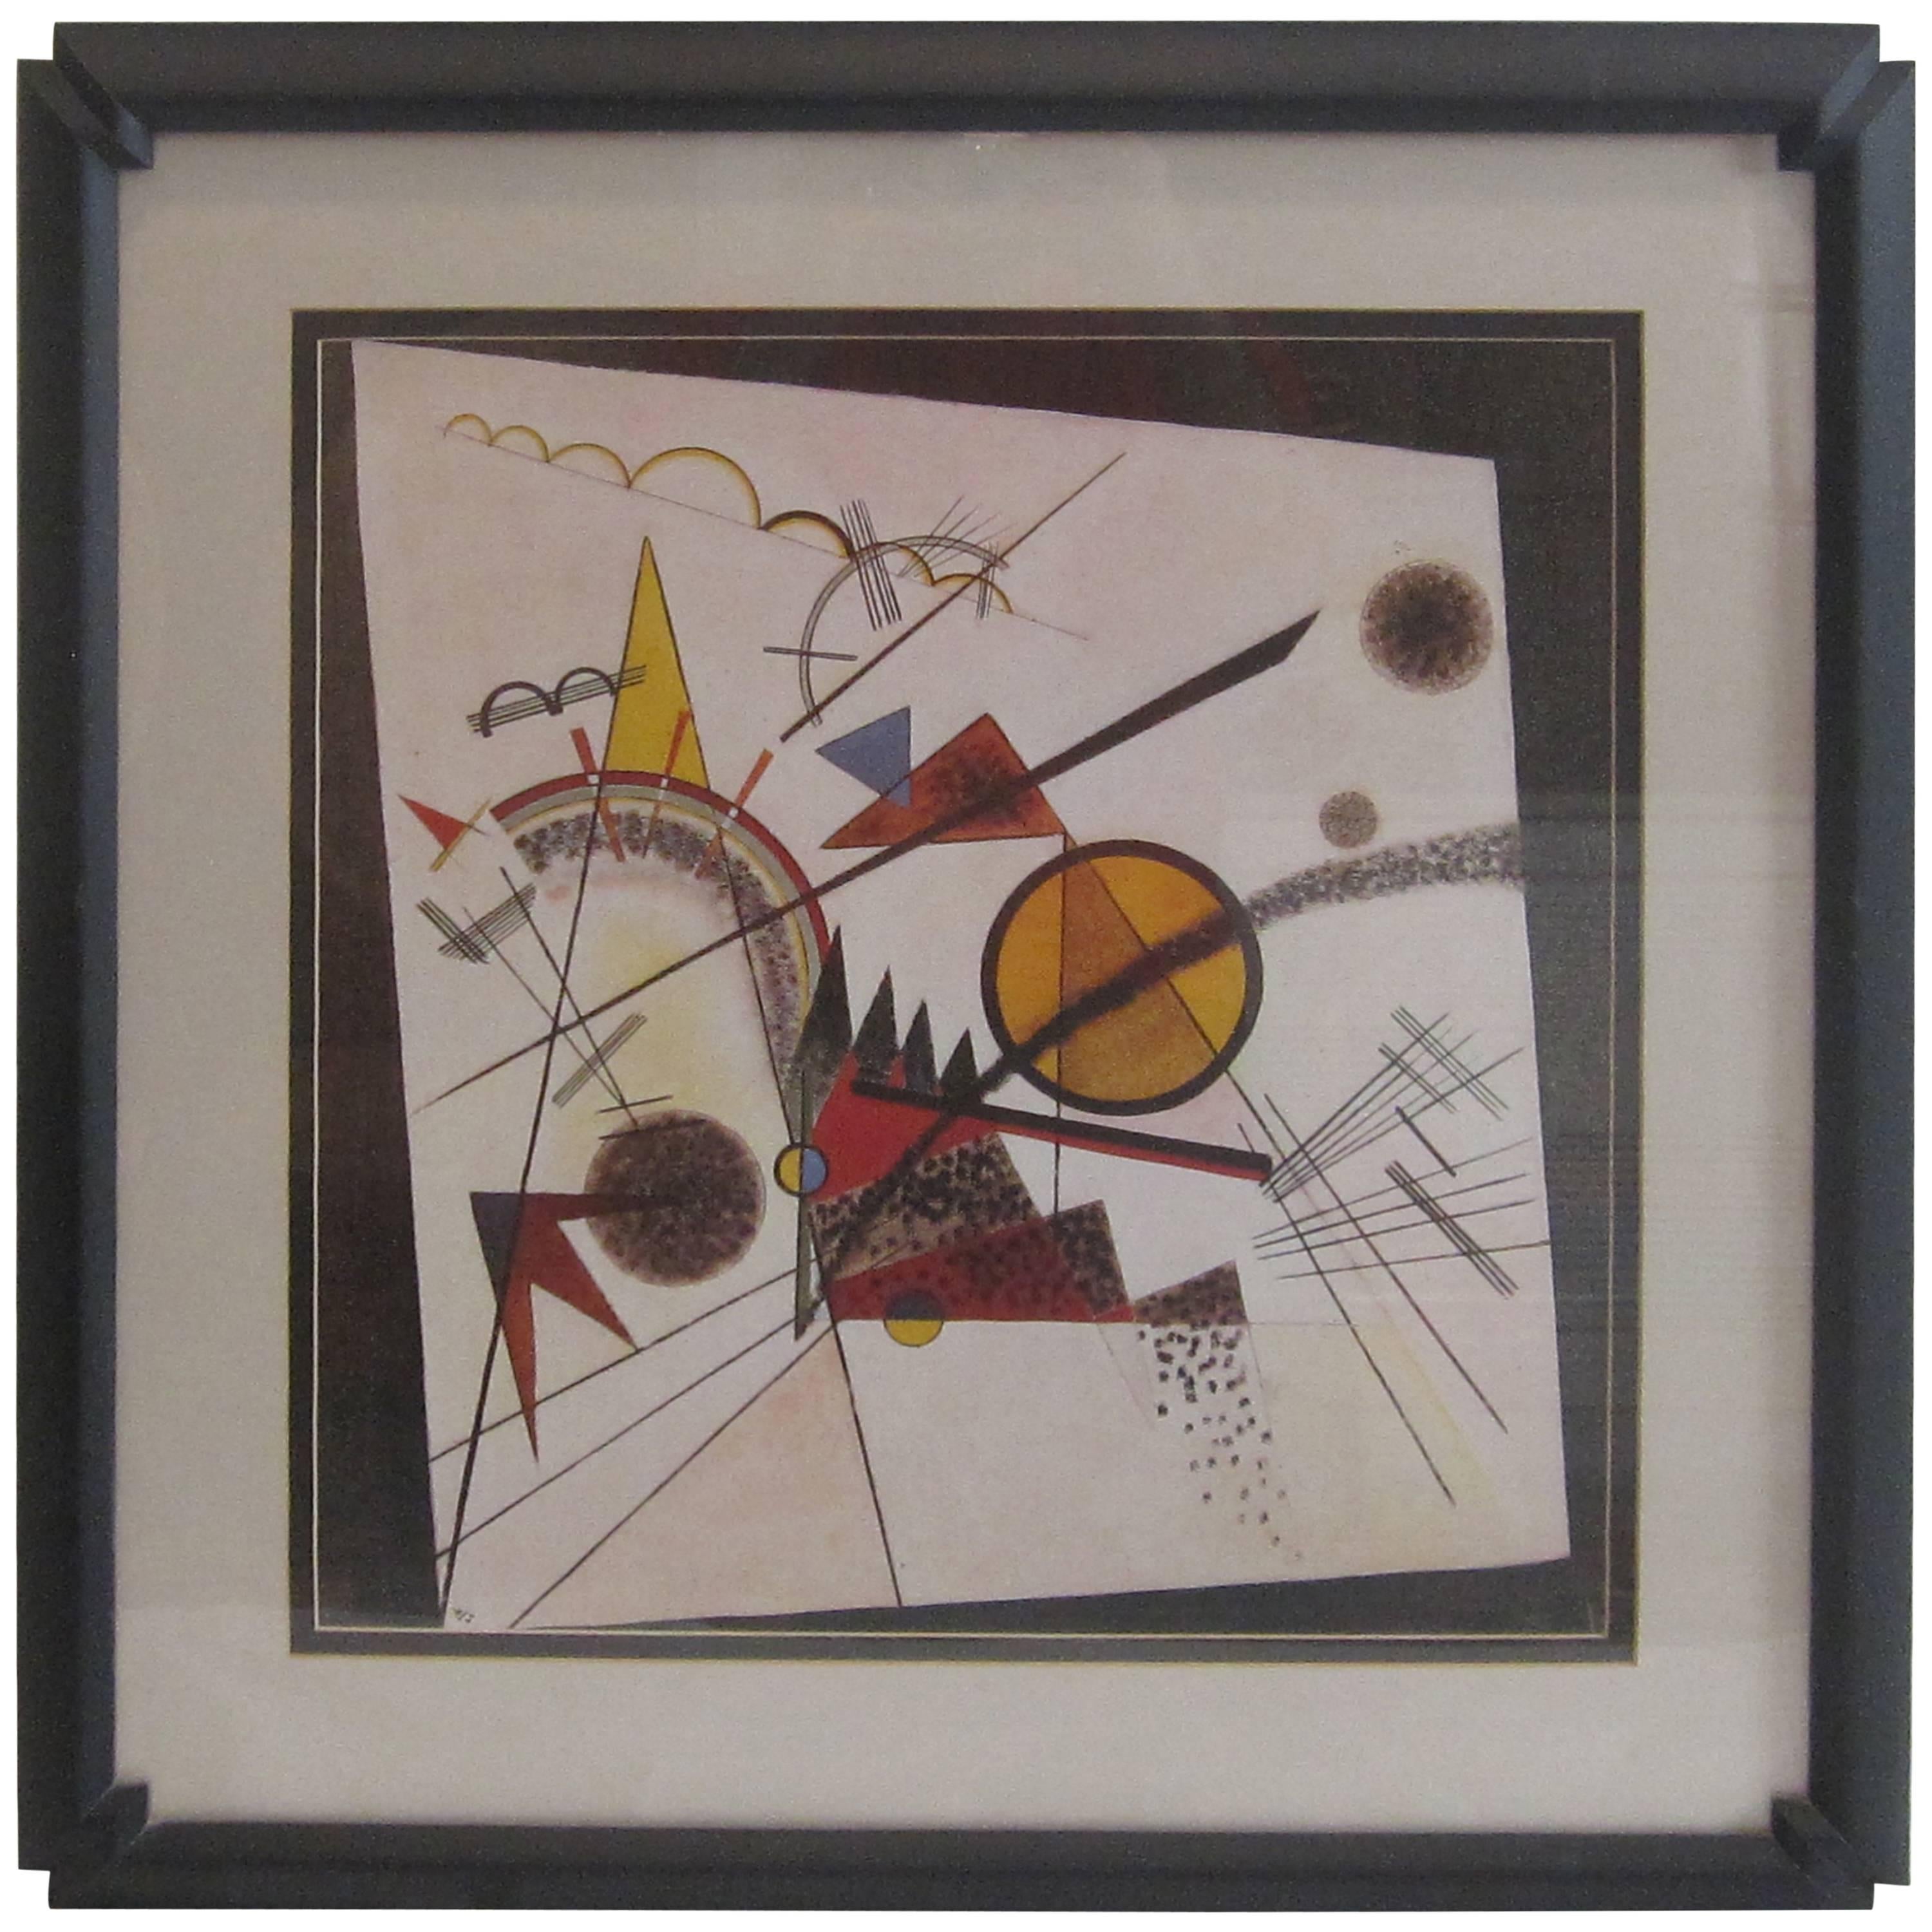 "In the Black Square" Framed Print by Wassily Kandisnky For Sale